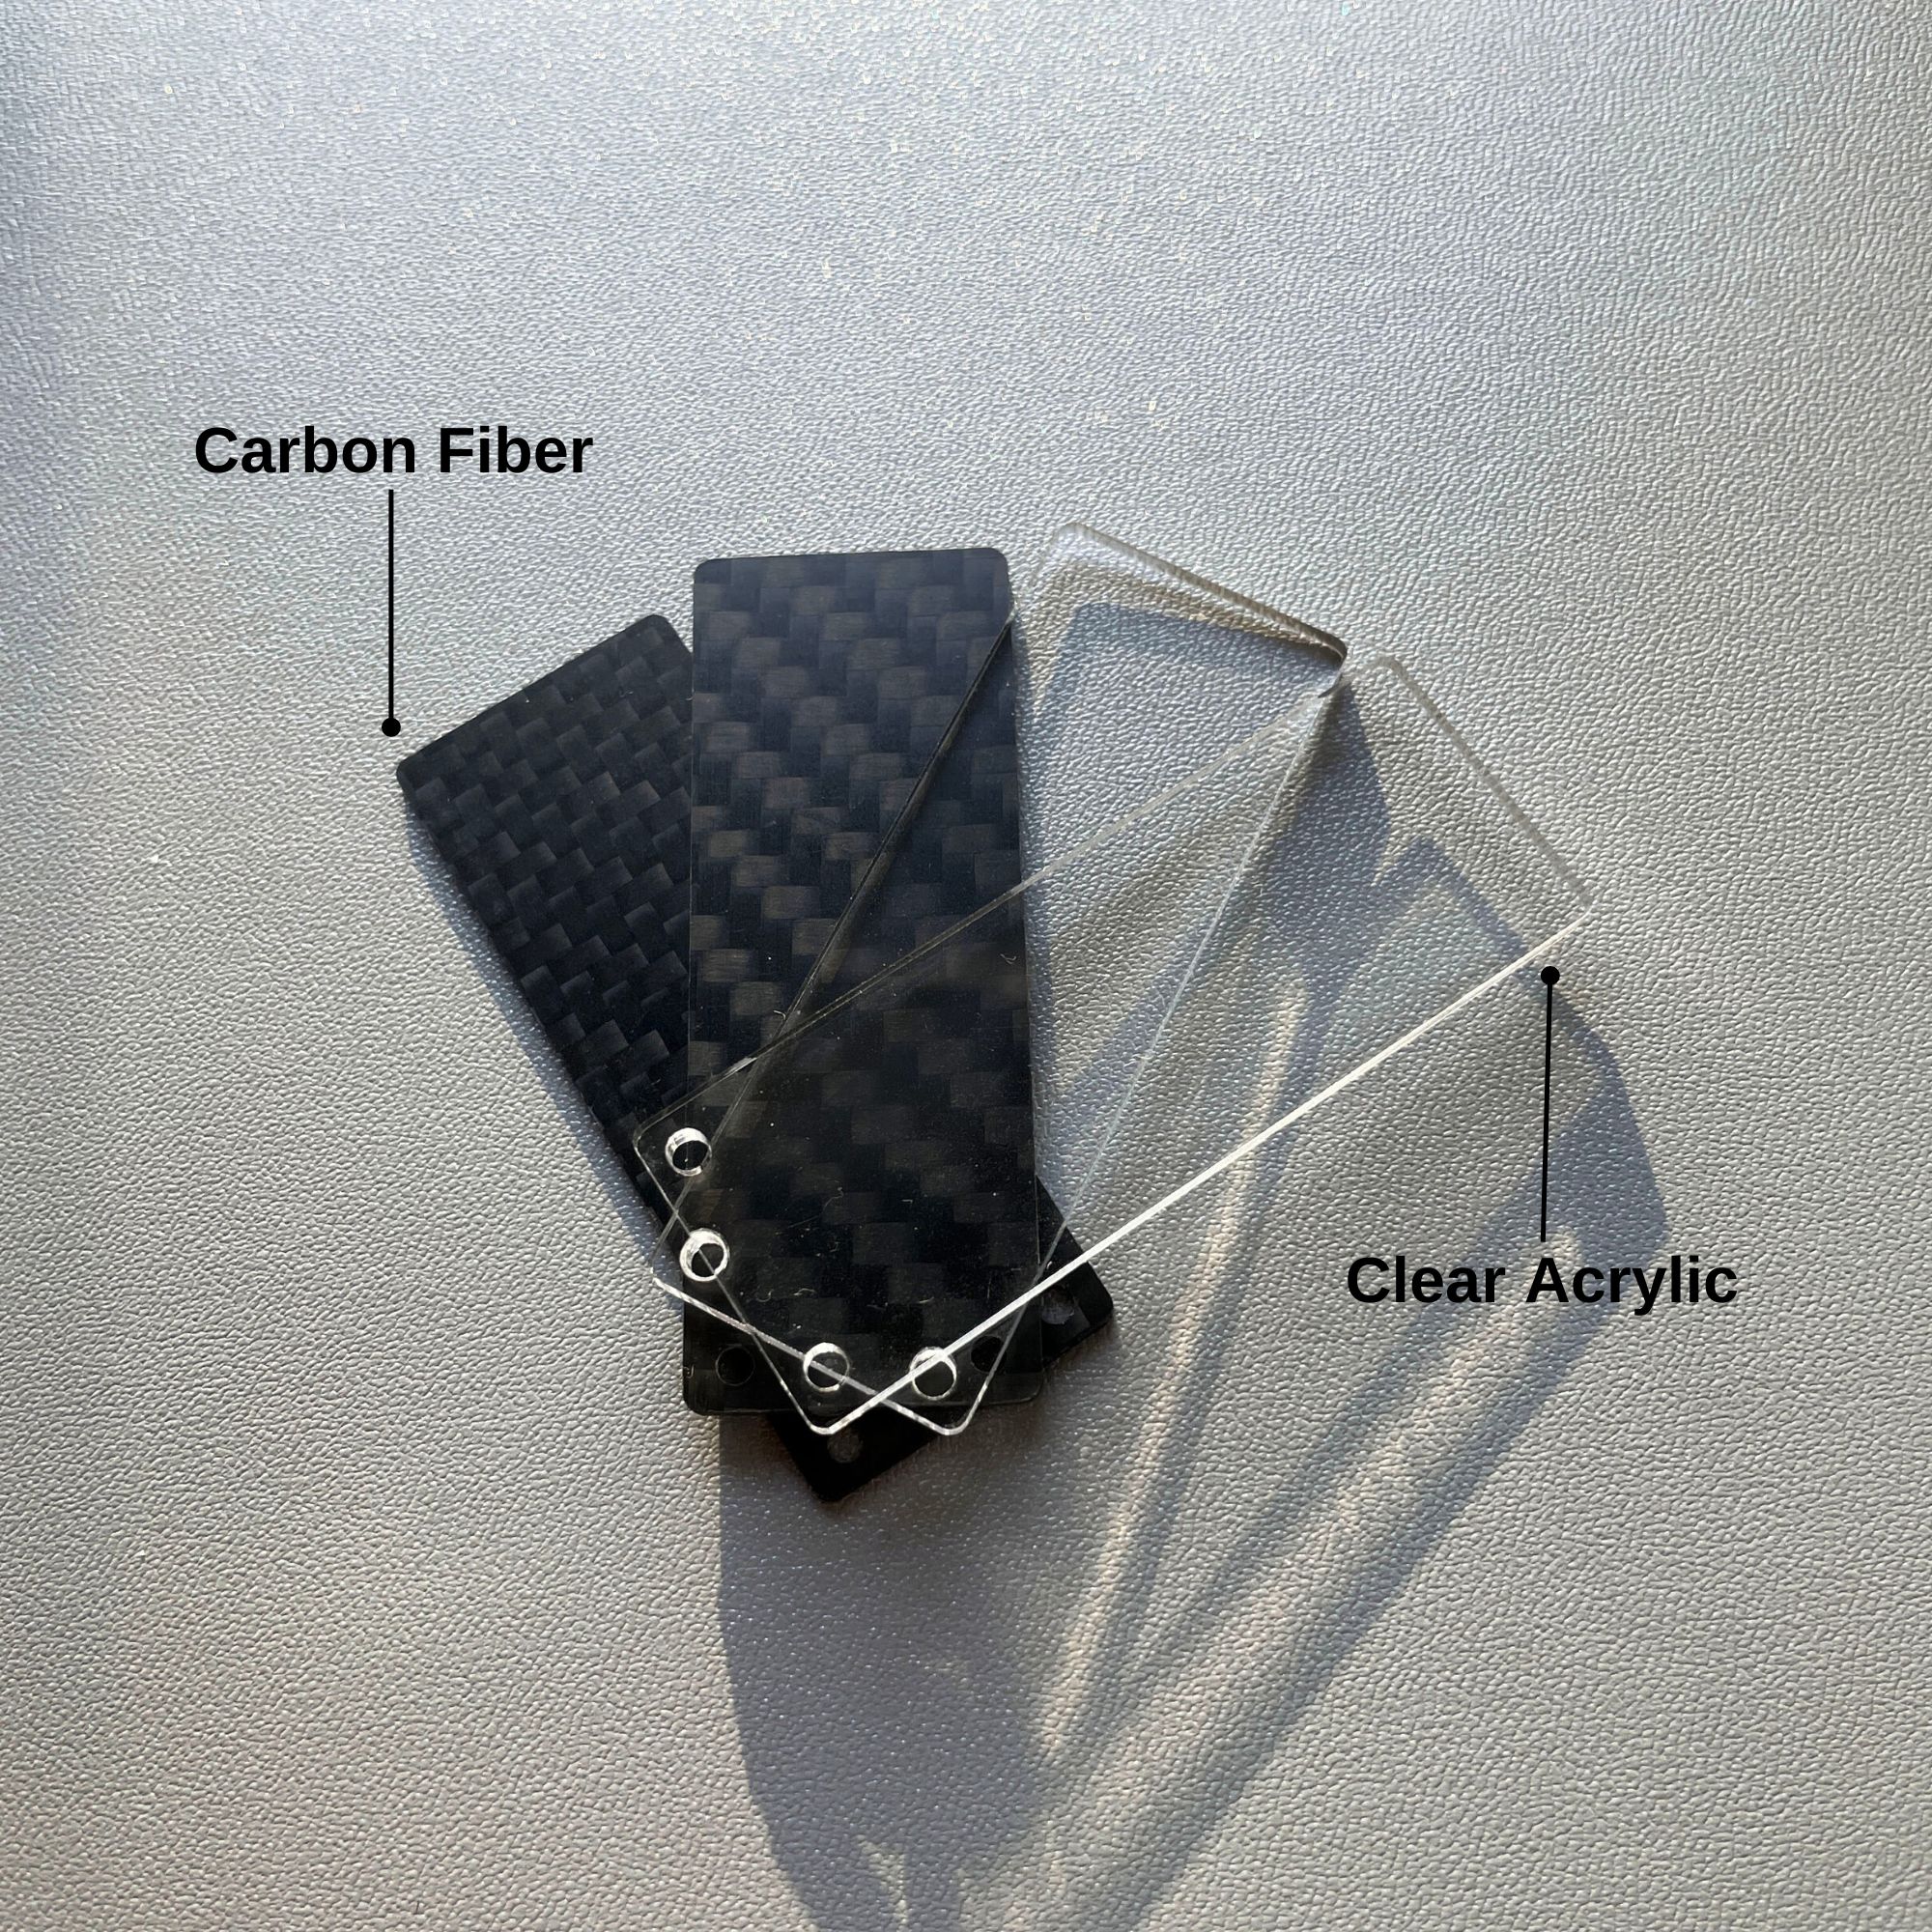 OLED Cover (a pair) for split keyboard - Clear Acrylic / Carbon Fiber